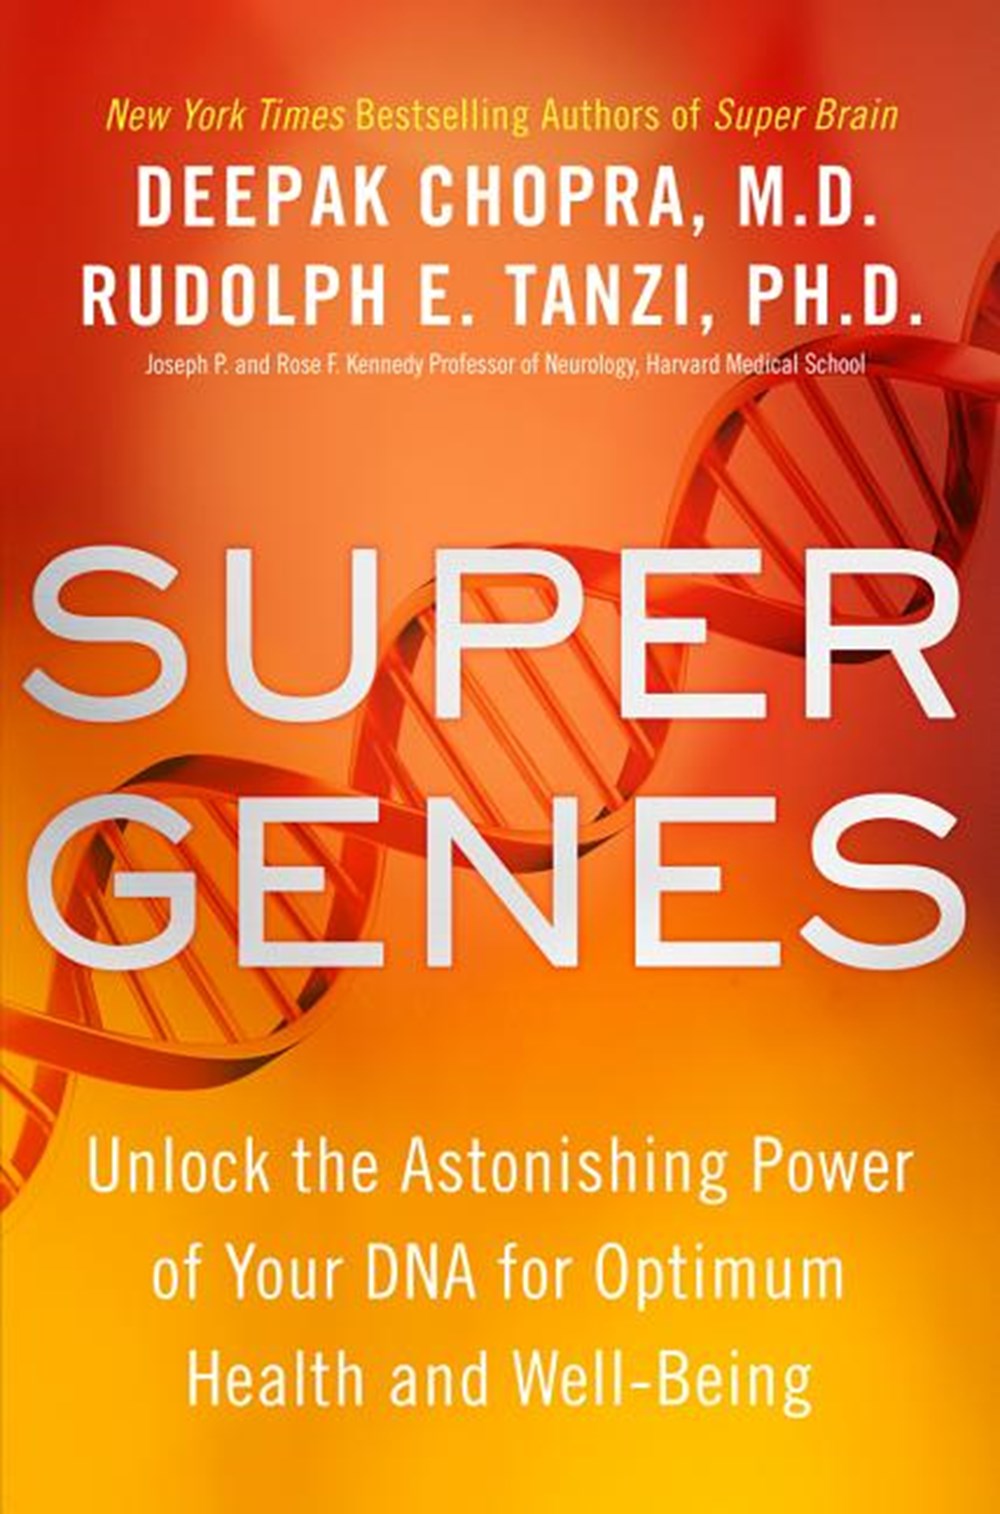 Super Genes Unlock the Astonishing Power of Your DNA for Optimum Health and Well-Being